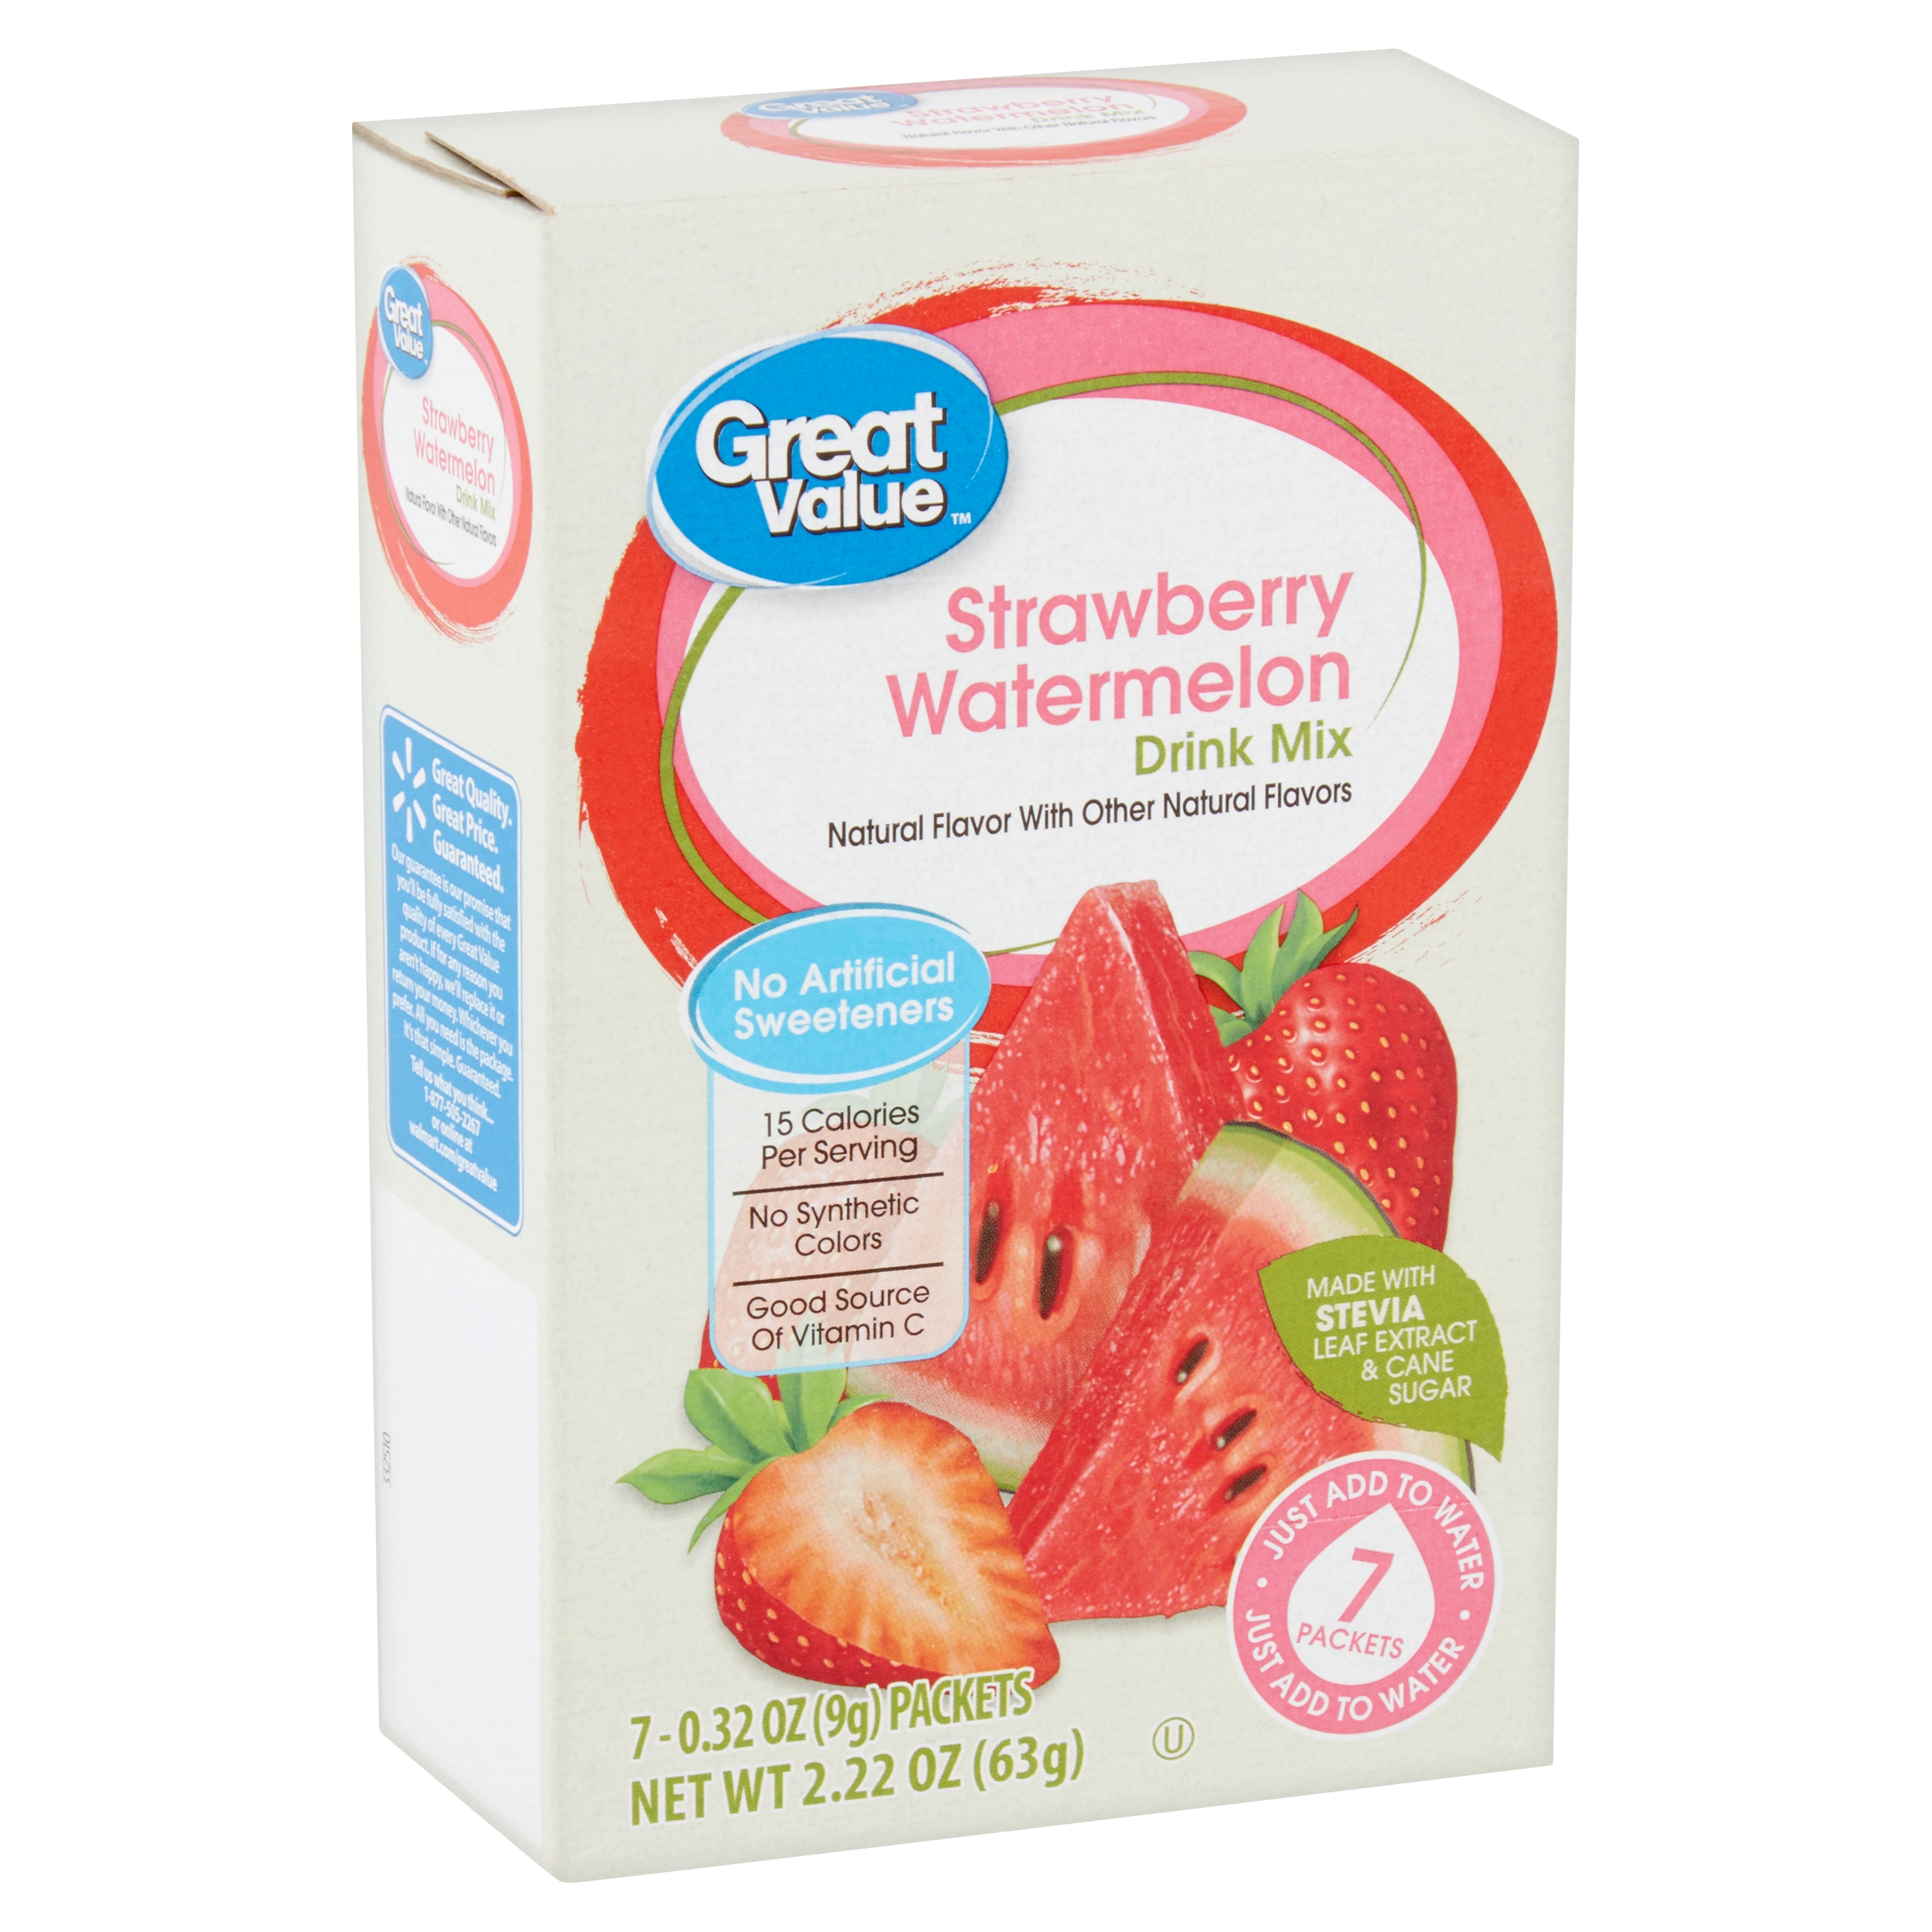 (4 Pack) Great Value Drink Mix with Stevia, Strawberry Watermelon, 2.22 Oz, 7 Count Image